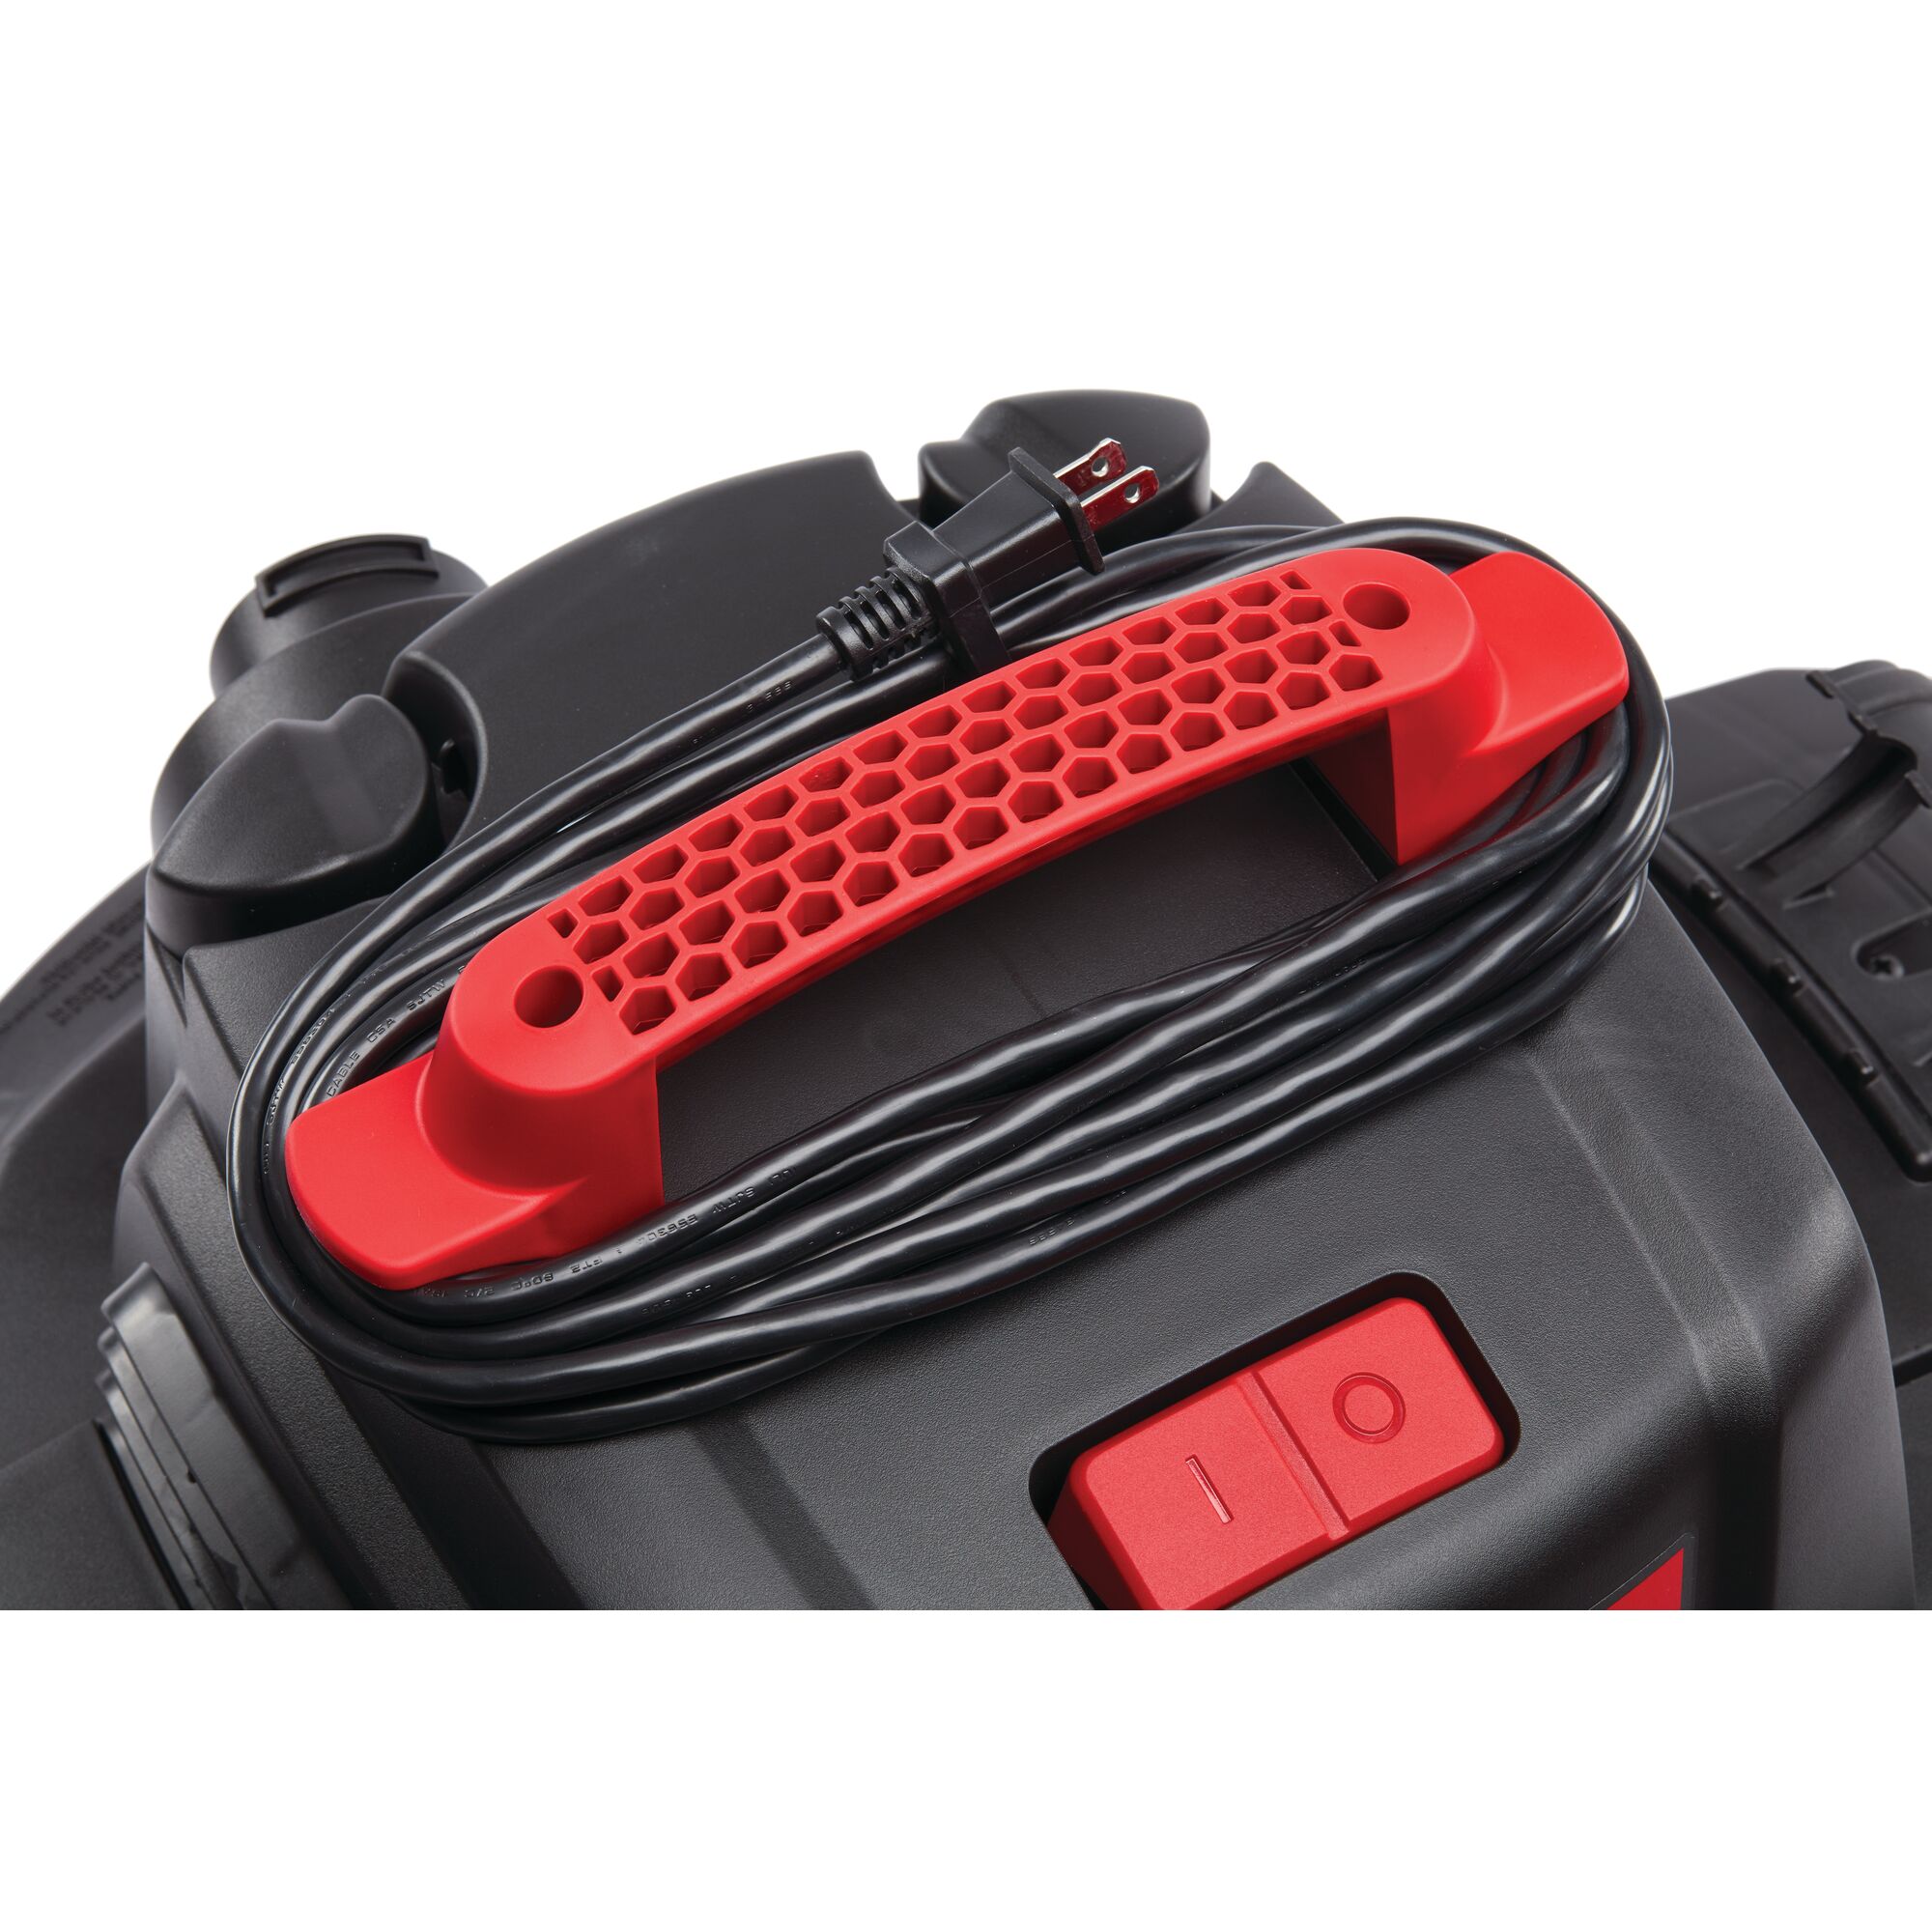 View of CRAFTSMAN Accessories: Vacuums highlighting product features